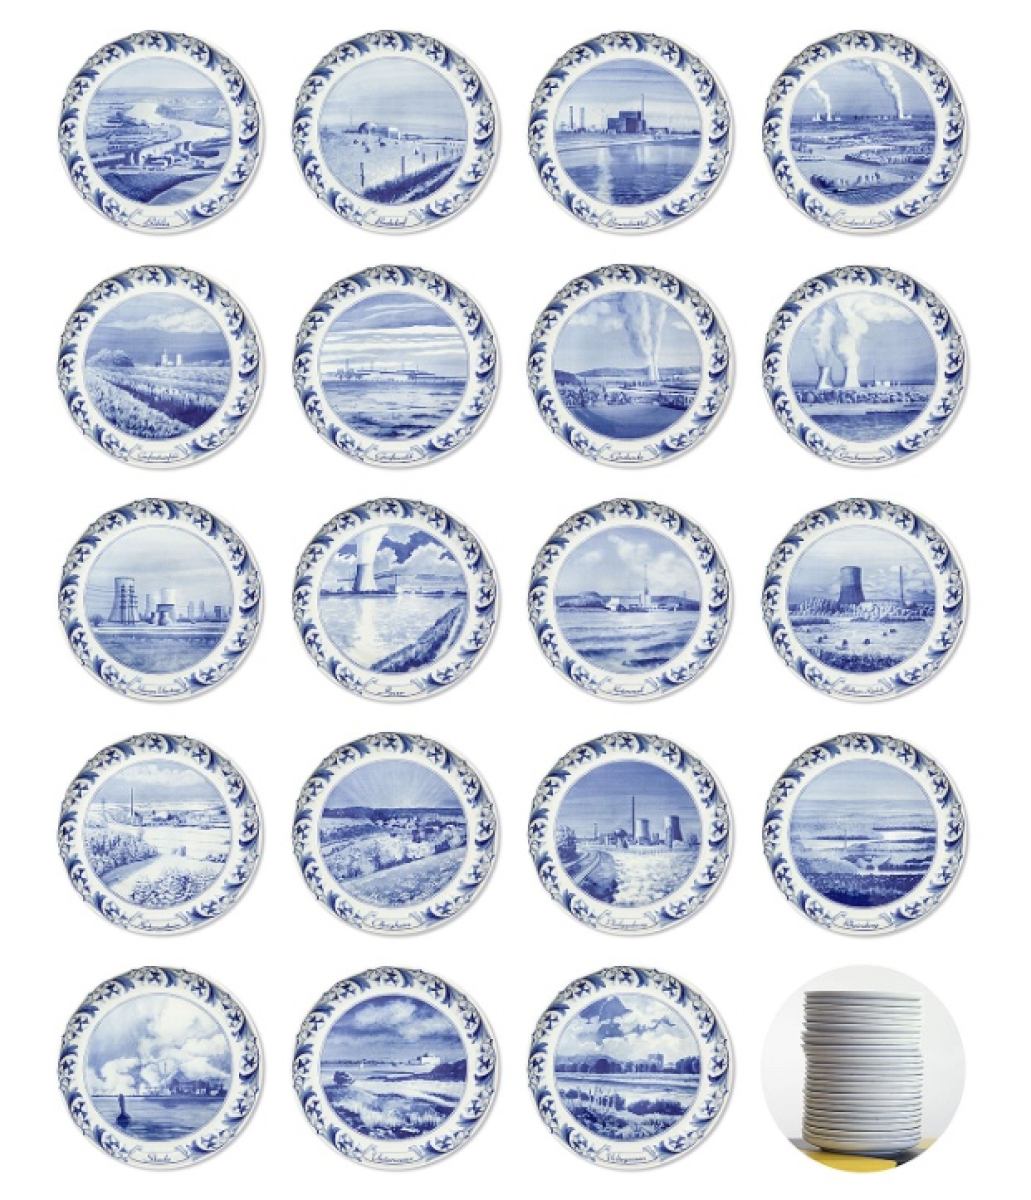 Full Set of 19 Nuclear Plates made of porcelain | Kunstbaron